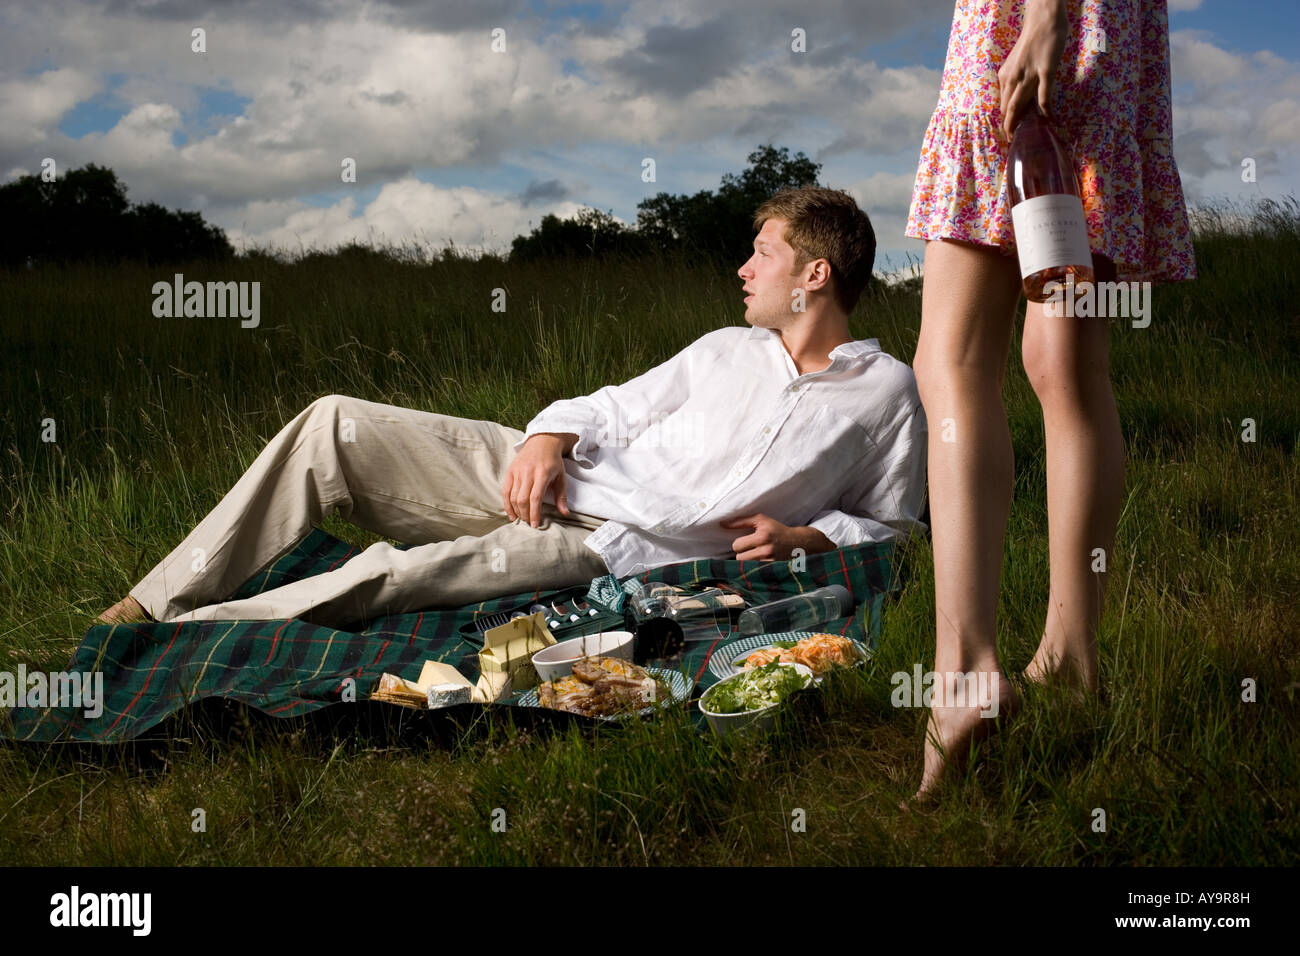 Man lying on picnic blanket with hamper food Stock Photo